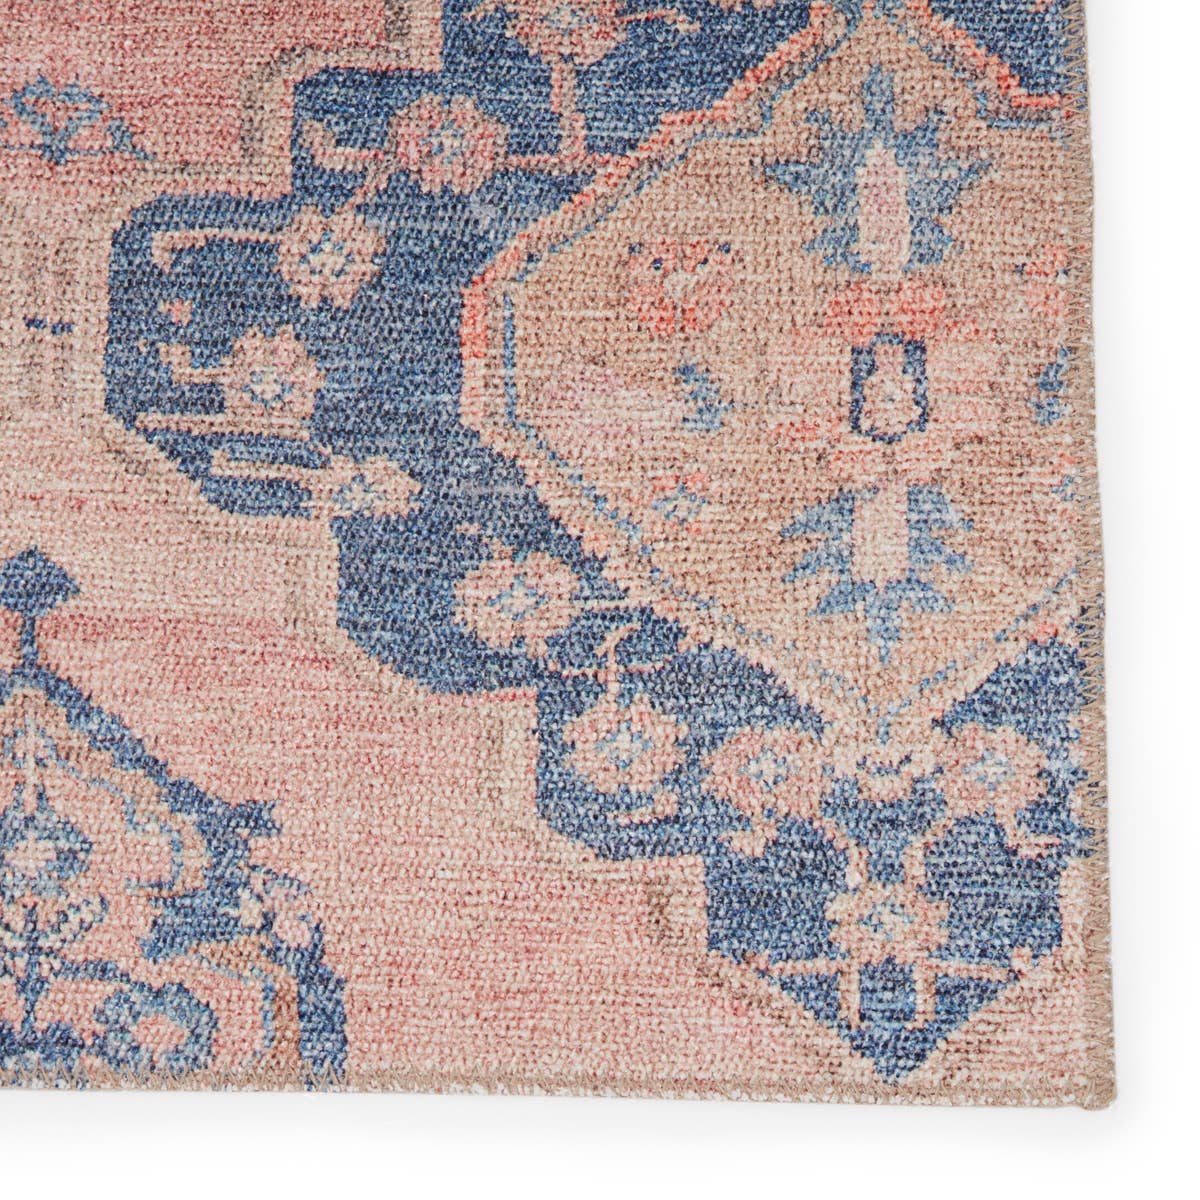 The Jaipur Living Kairos Adalee Area Rug, or KAR01, features dusty pink and blue diamond medallions with subtle distressing for a romantic, elegantly worn look. This power loomed area rug is family and pet friendly and a perfect choice for your living room, dining room, or other high traffic areas.